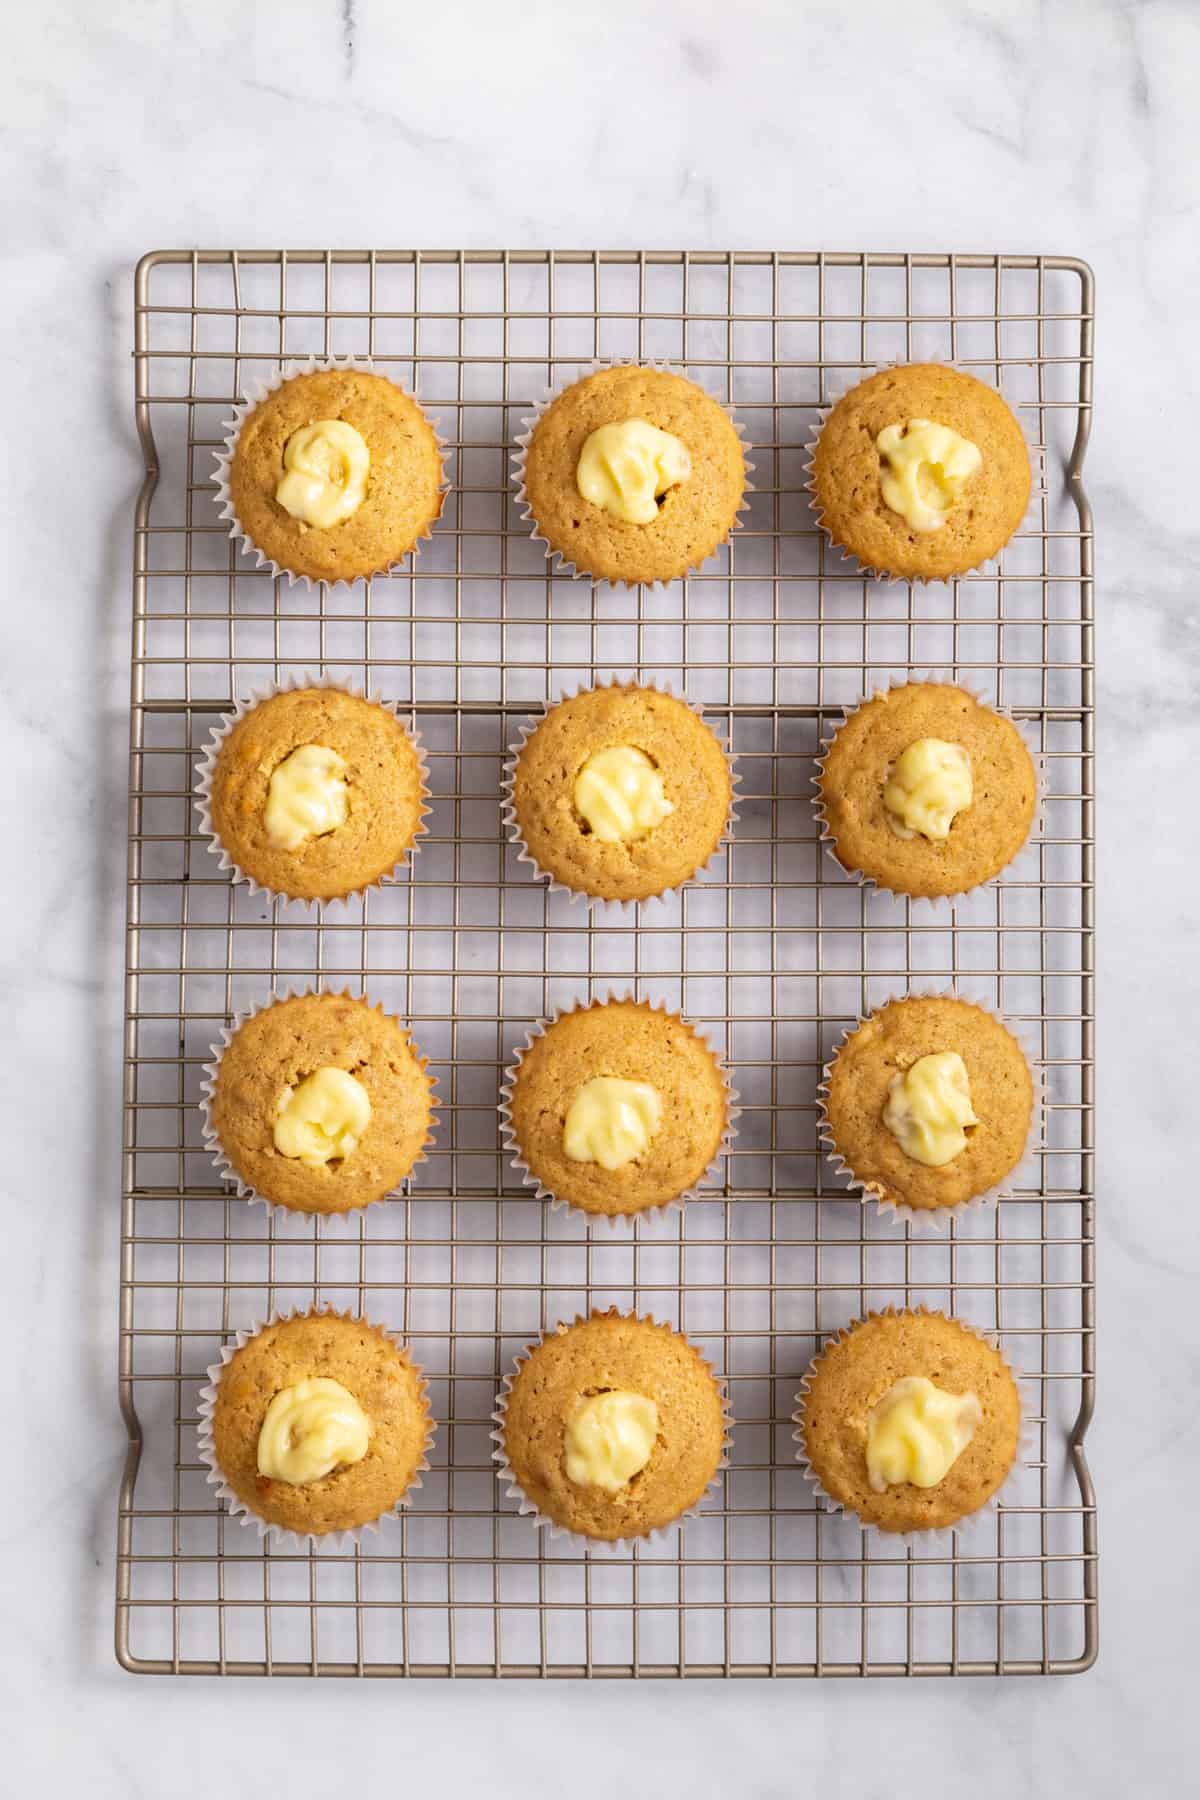 12 baked banana pudding cupcakes sitting on a cooling rack with banana pudding filling.